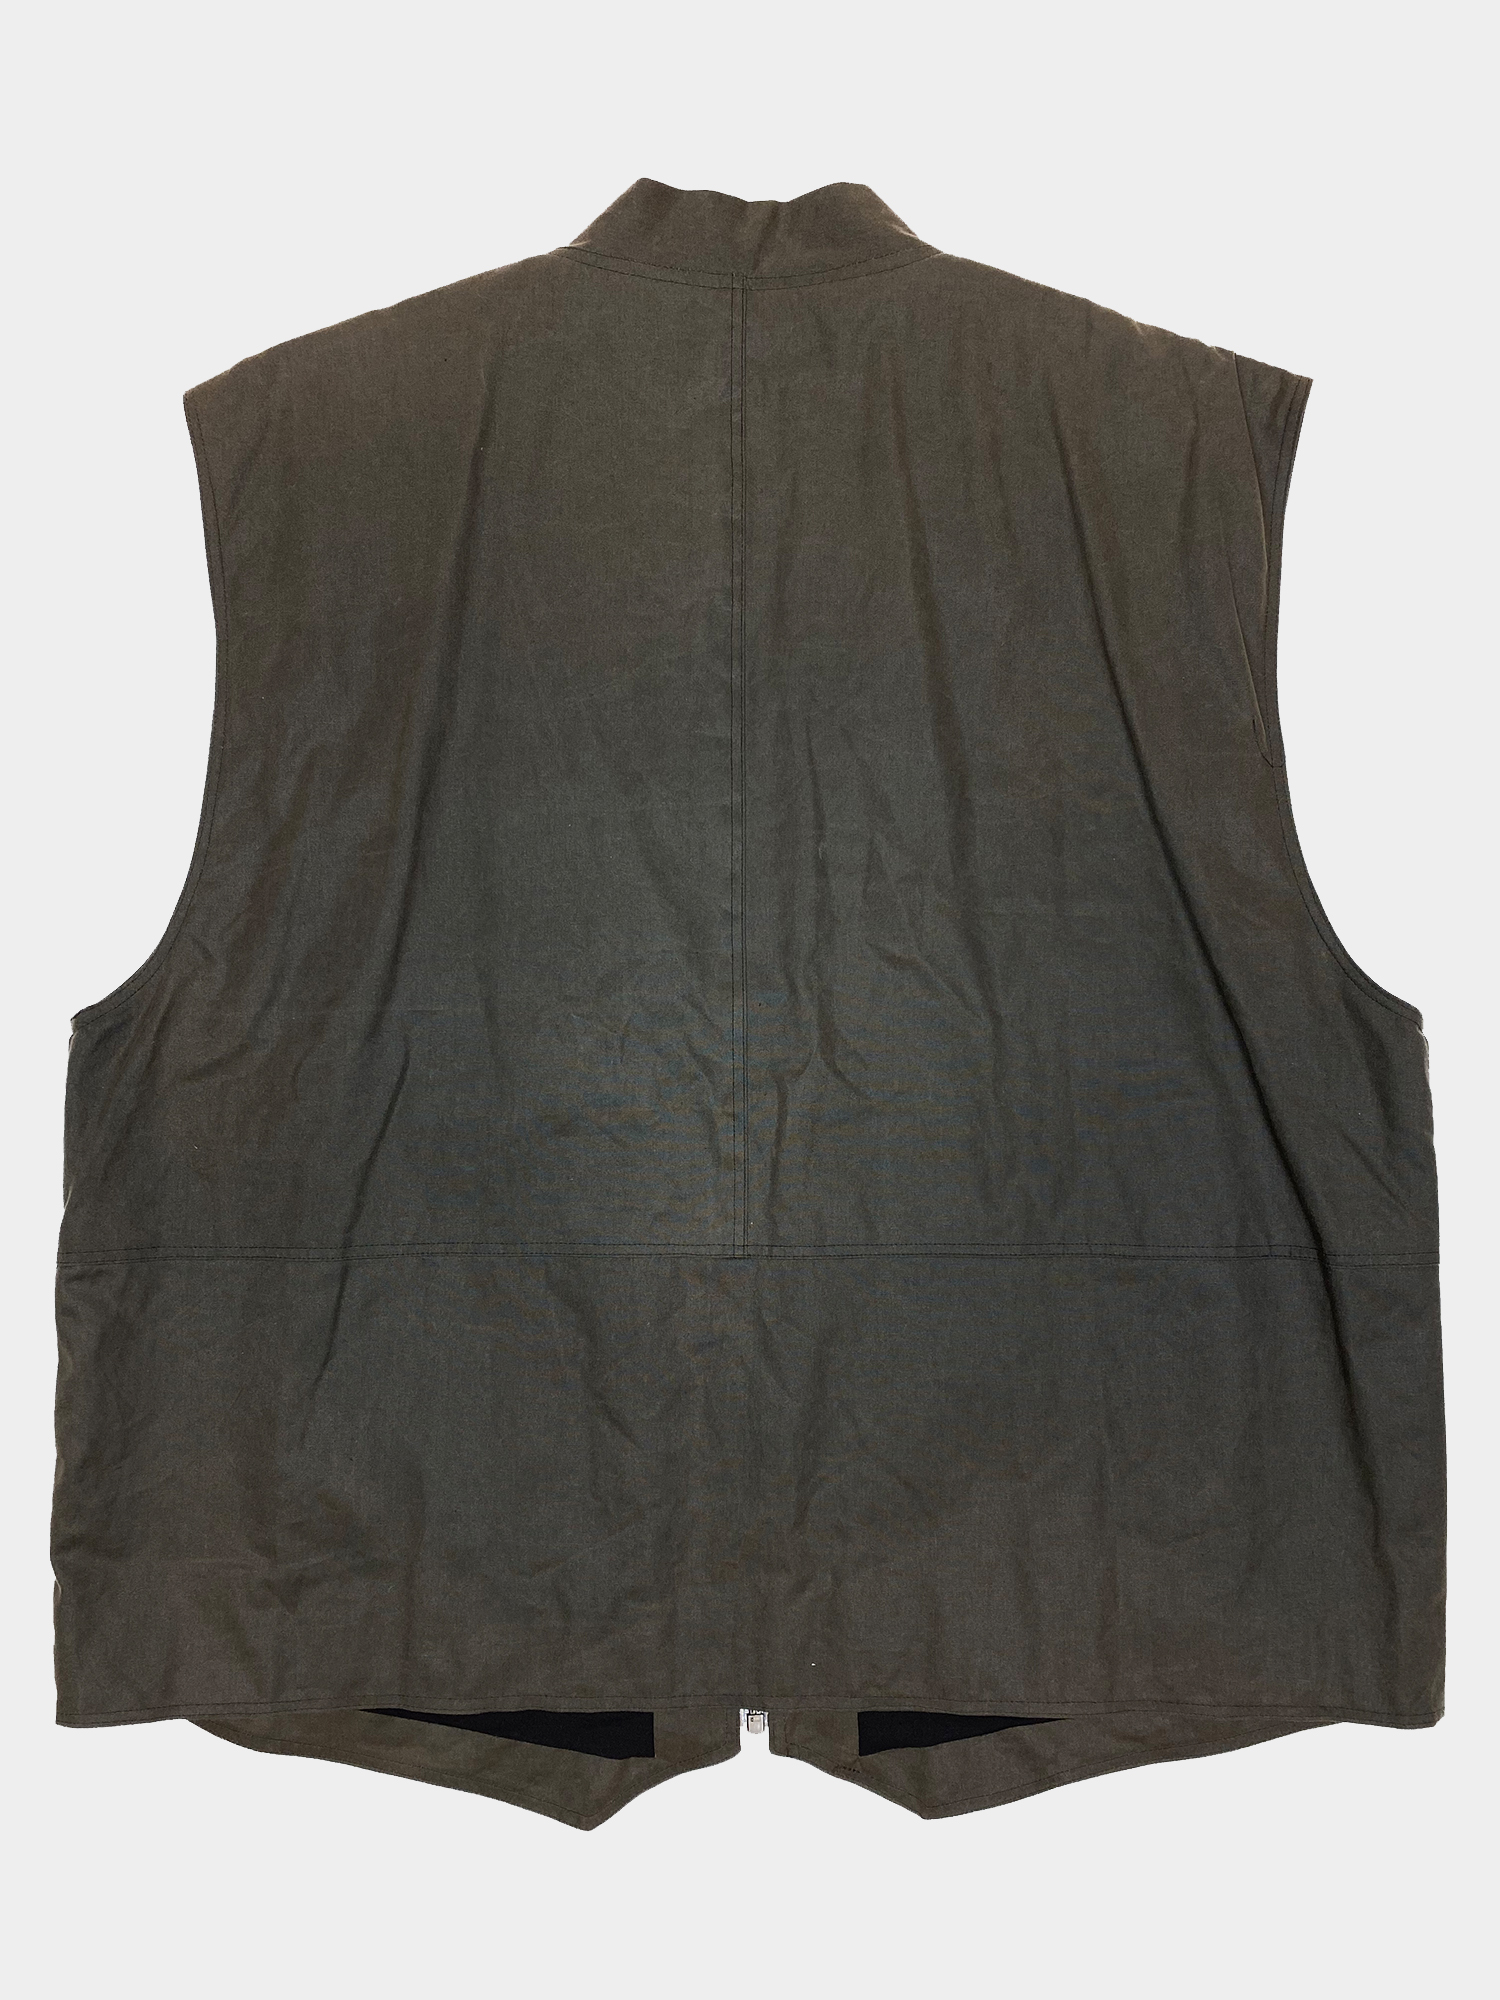 RAF SIMONS A/W02 Virginia Creeper Hunting Vest — ARCHIVED